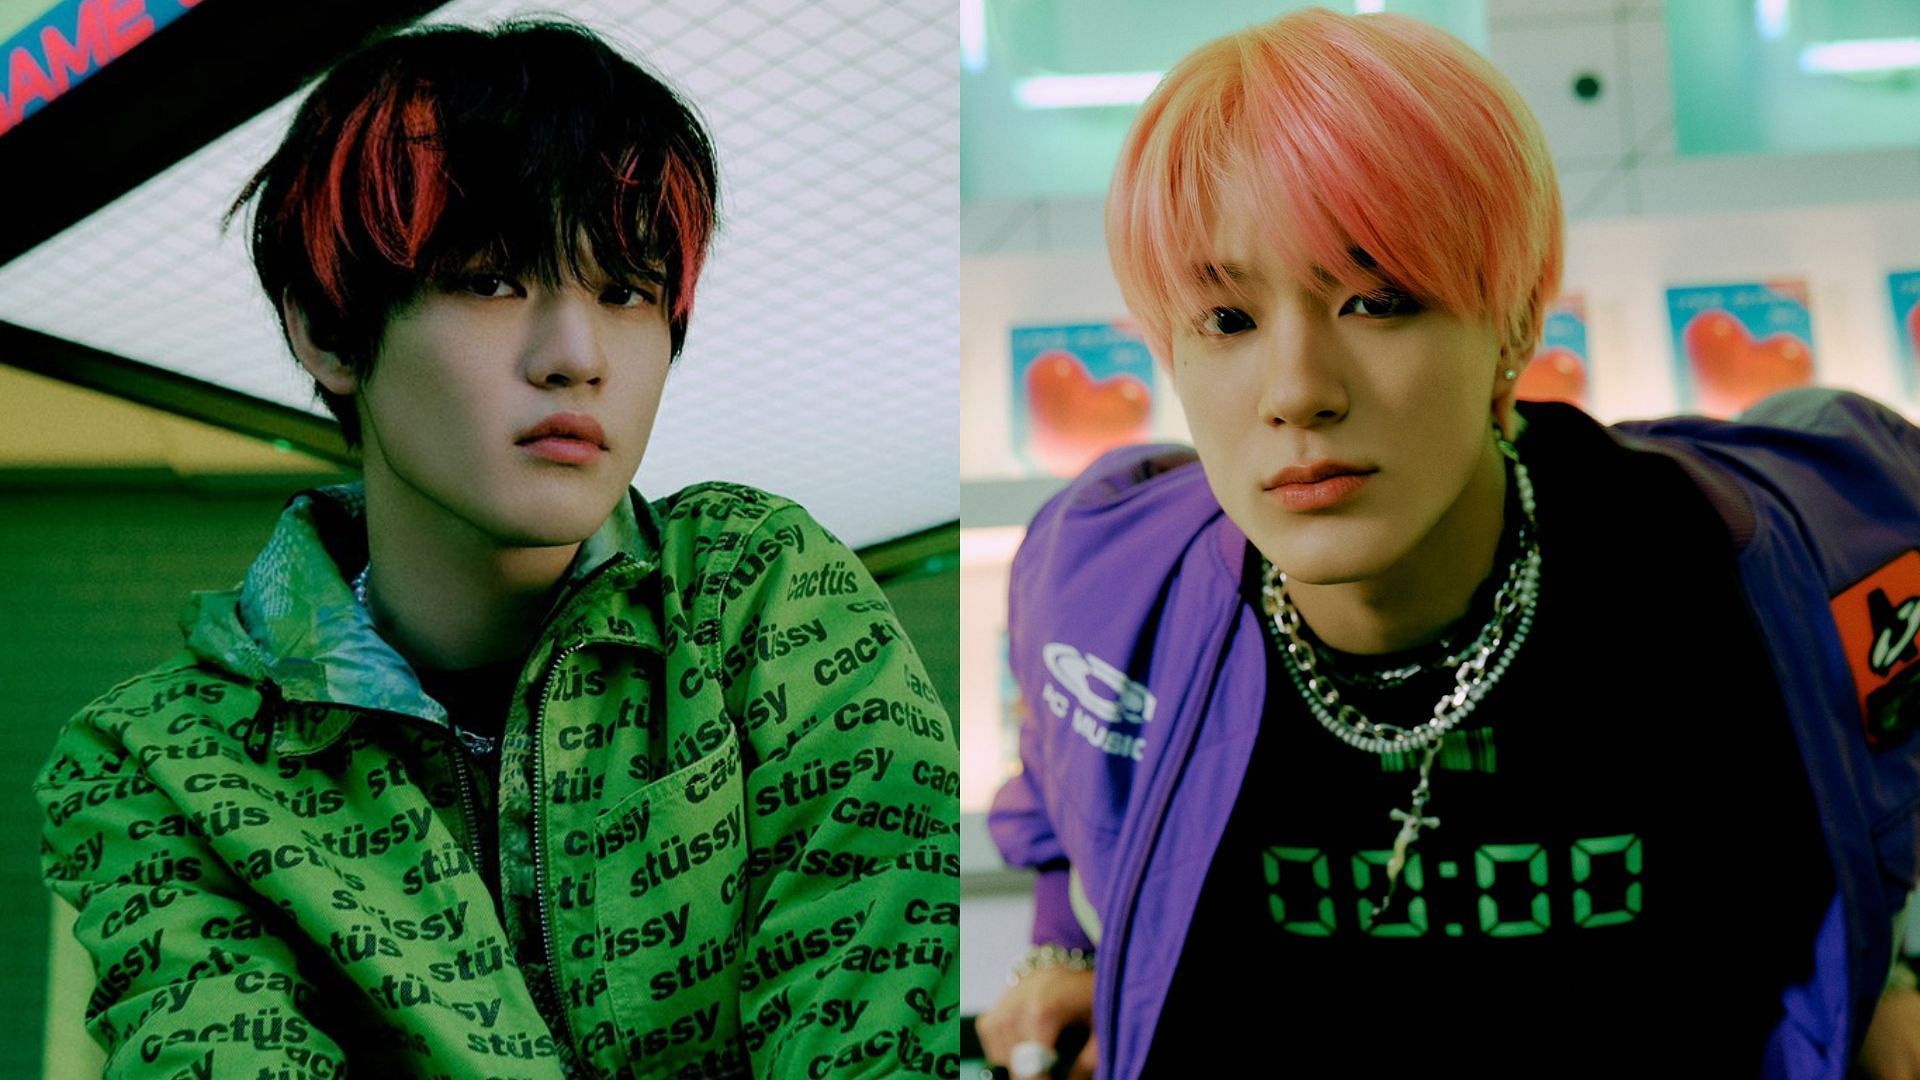 NCT DREAM&#039;s Chenle and Jeno test COVID positive (Image via @NCTsmtown_DREAM/Twitter)